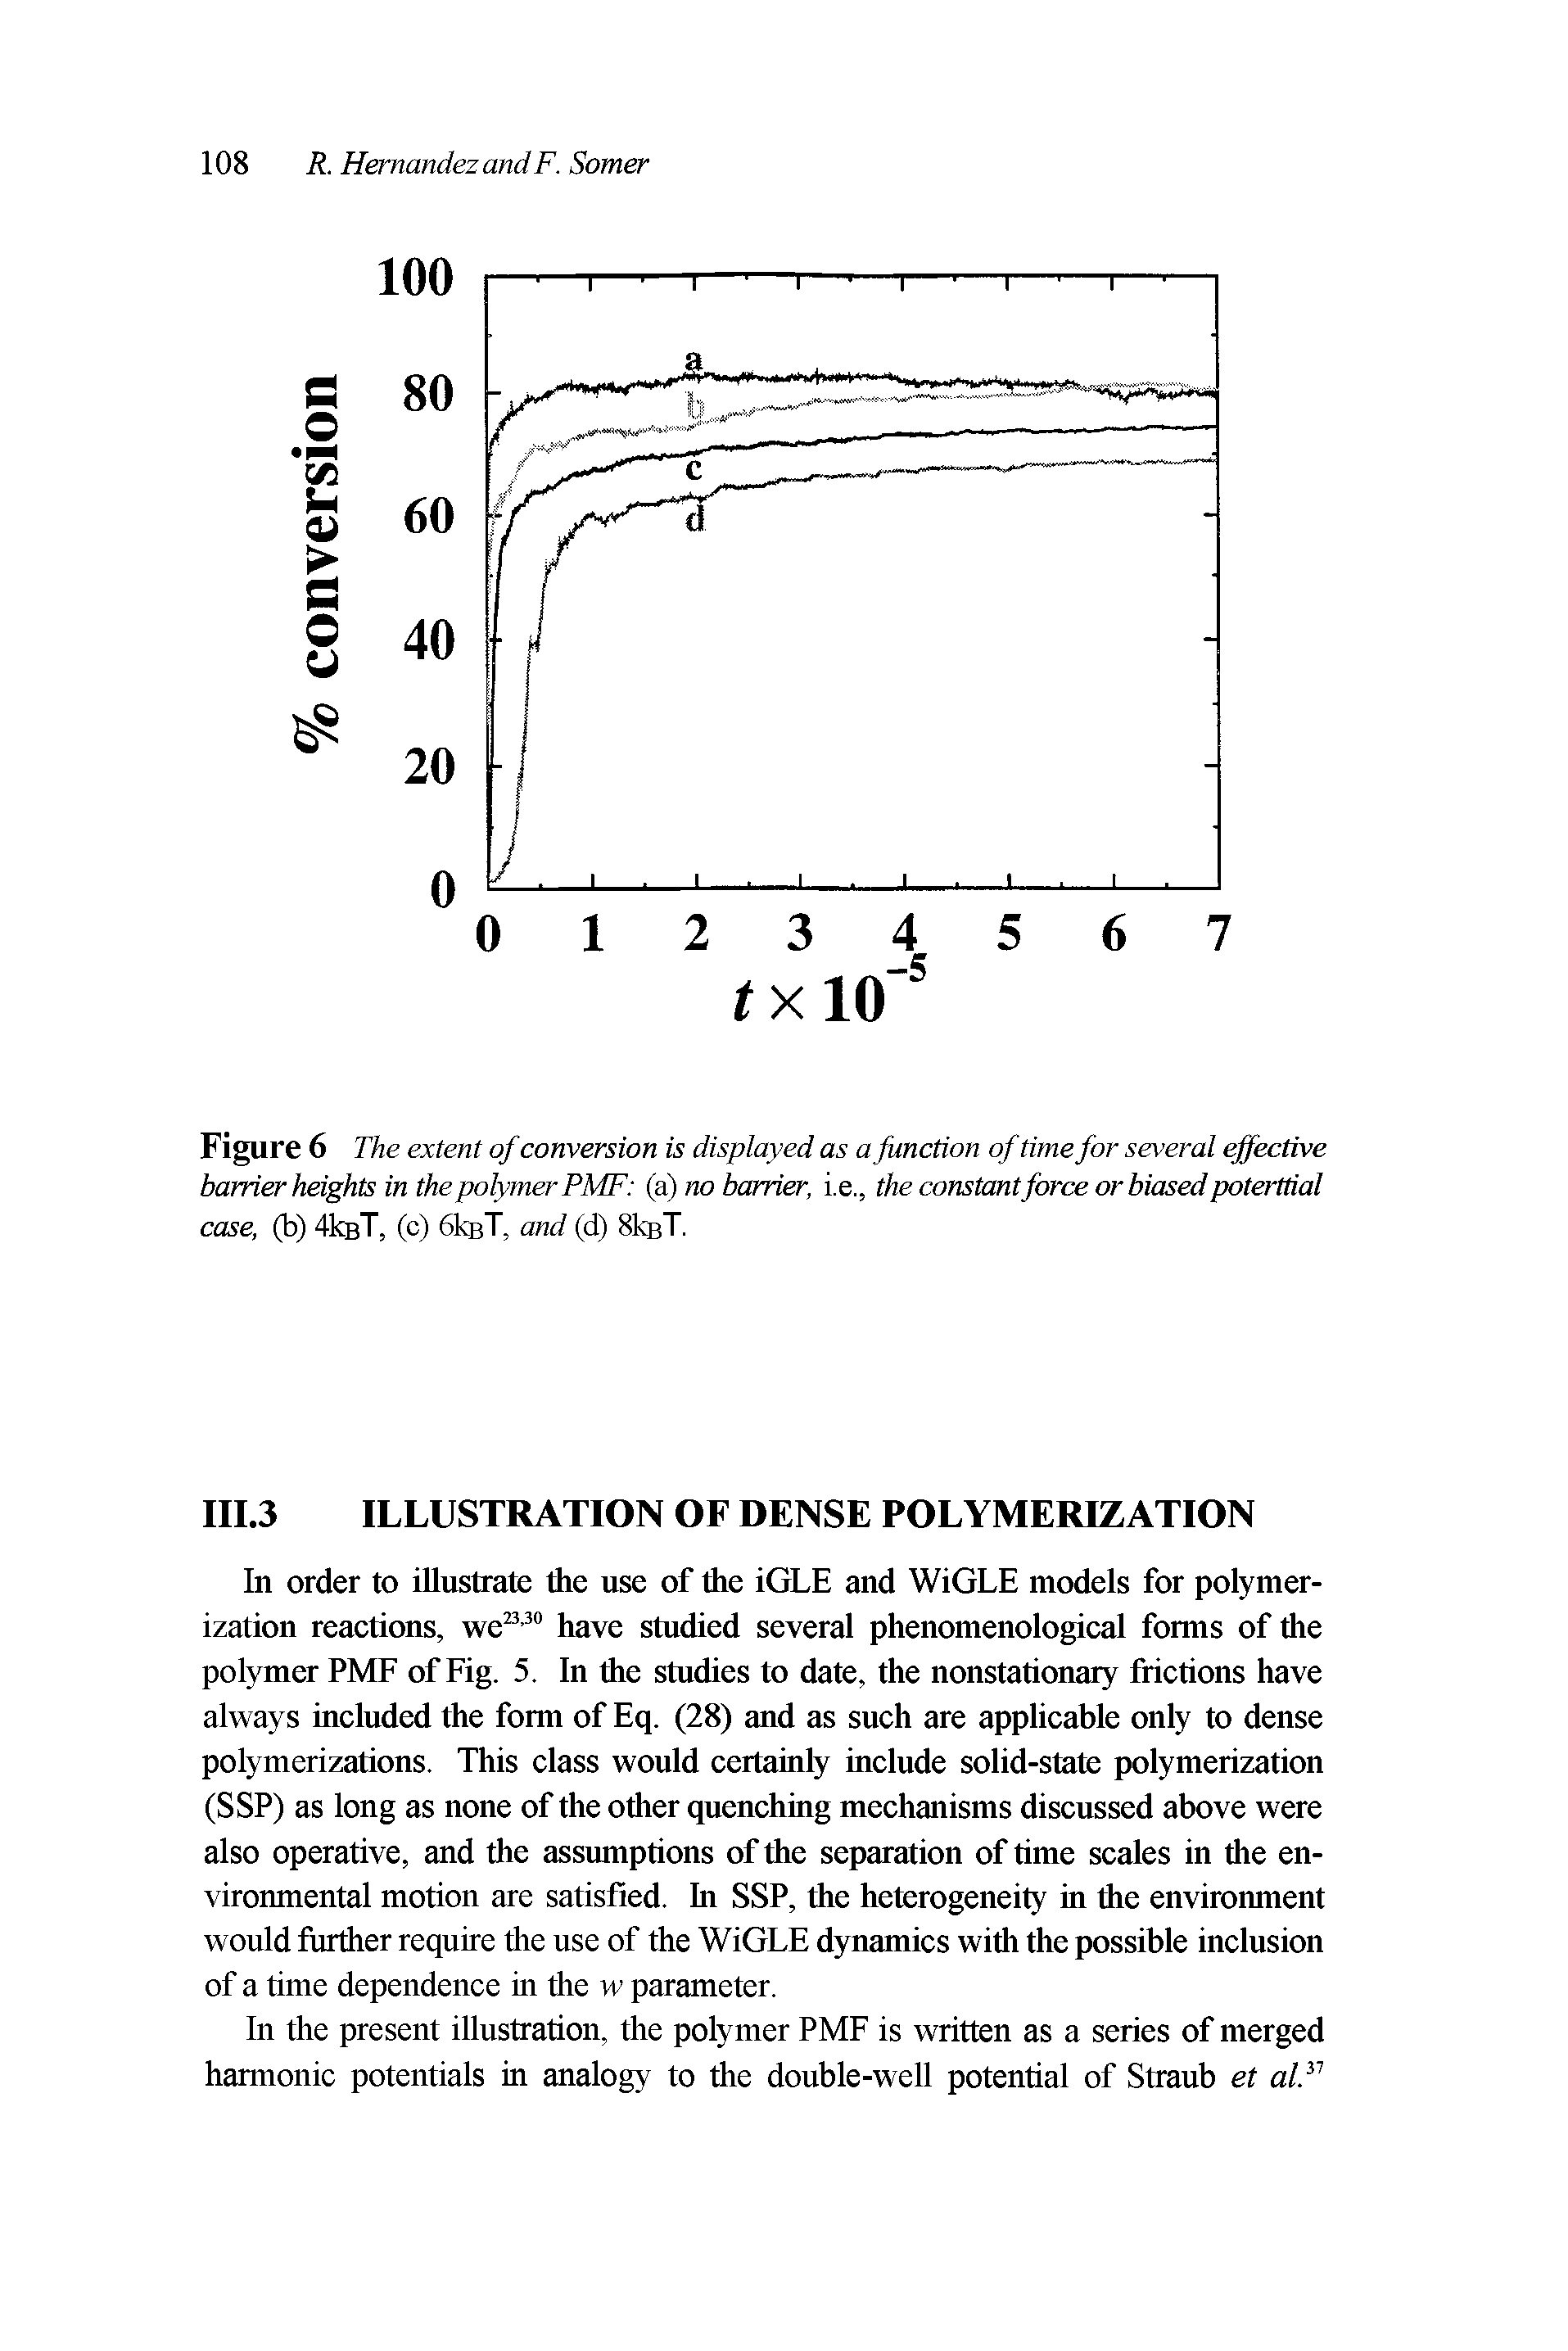 Figure 6 The extent of conversion is displayed as a function of time for several effective barrier heights in the polymer PMF (a) no barrier, i.e., the constant force or biased poterttial case, (b) 4kBT, (c) OkeT, and (d) SkeT.